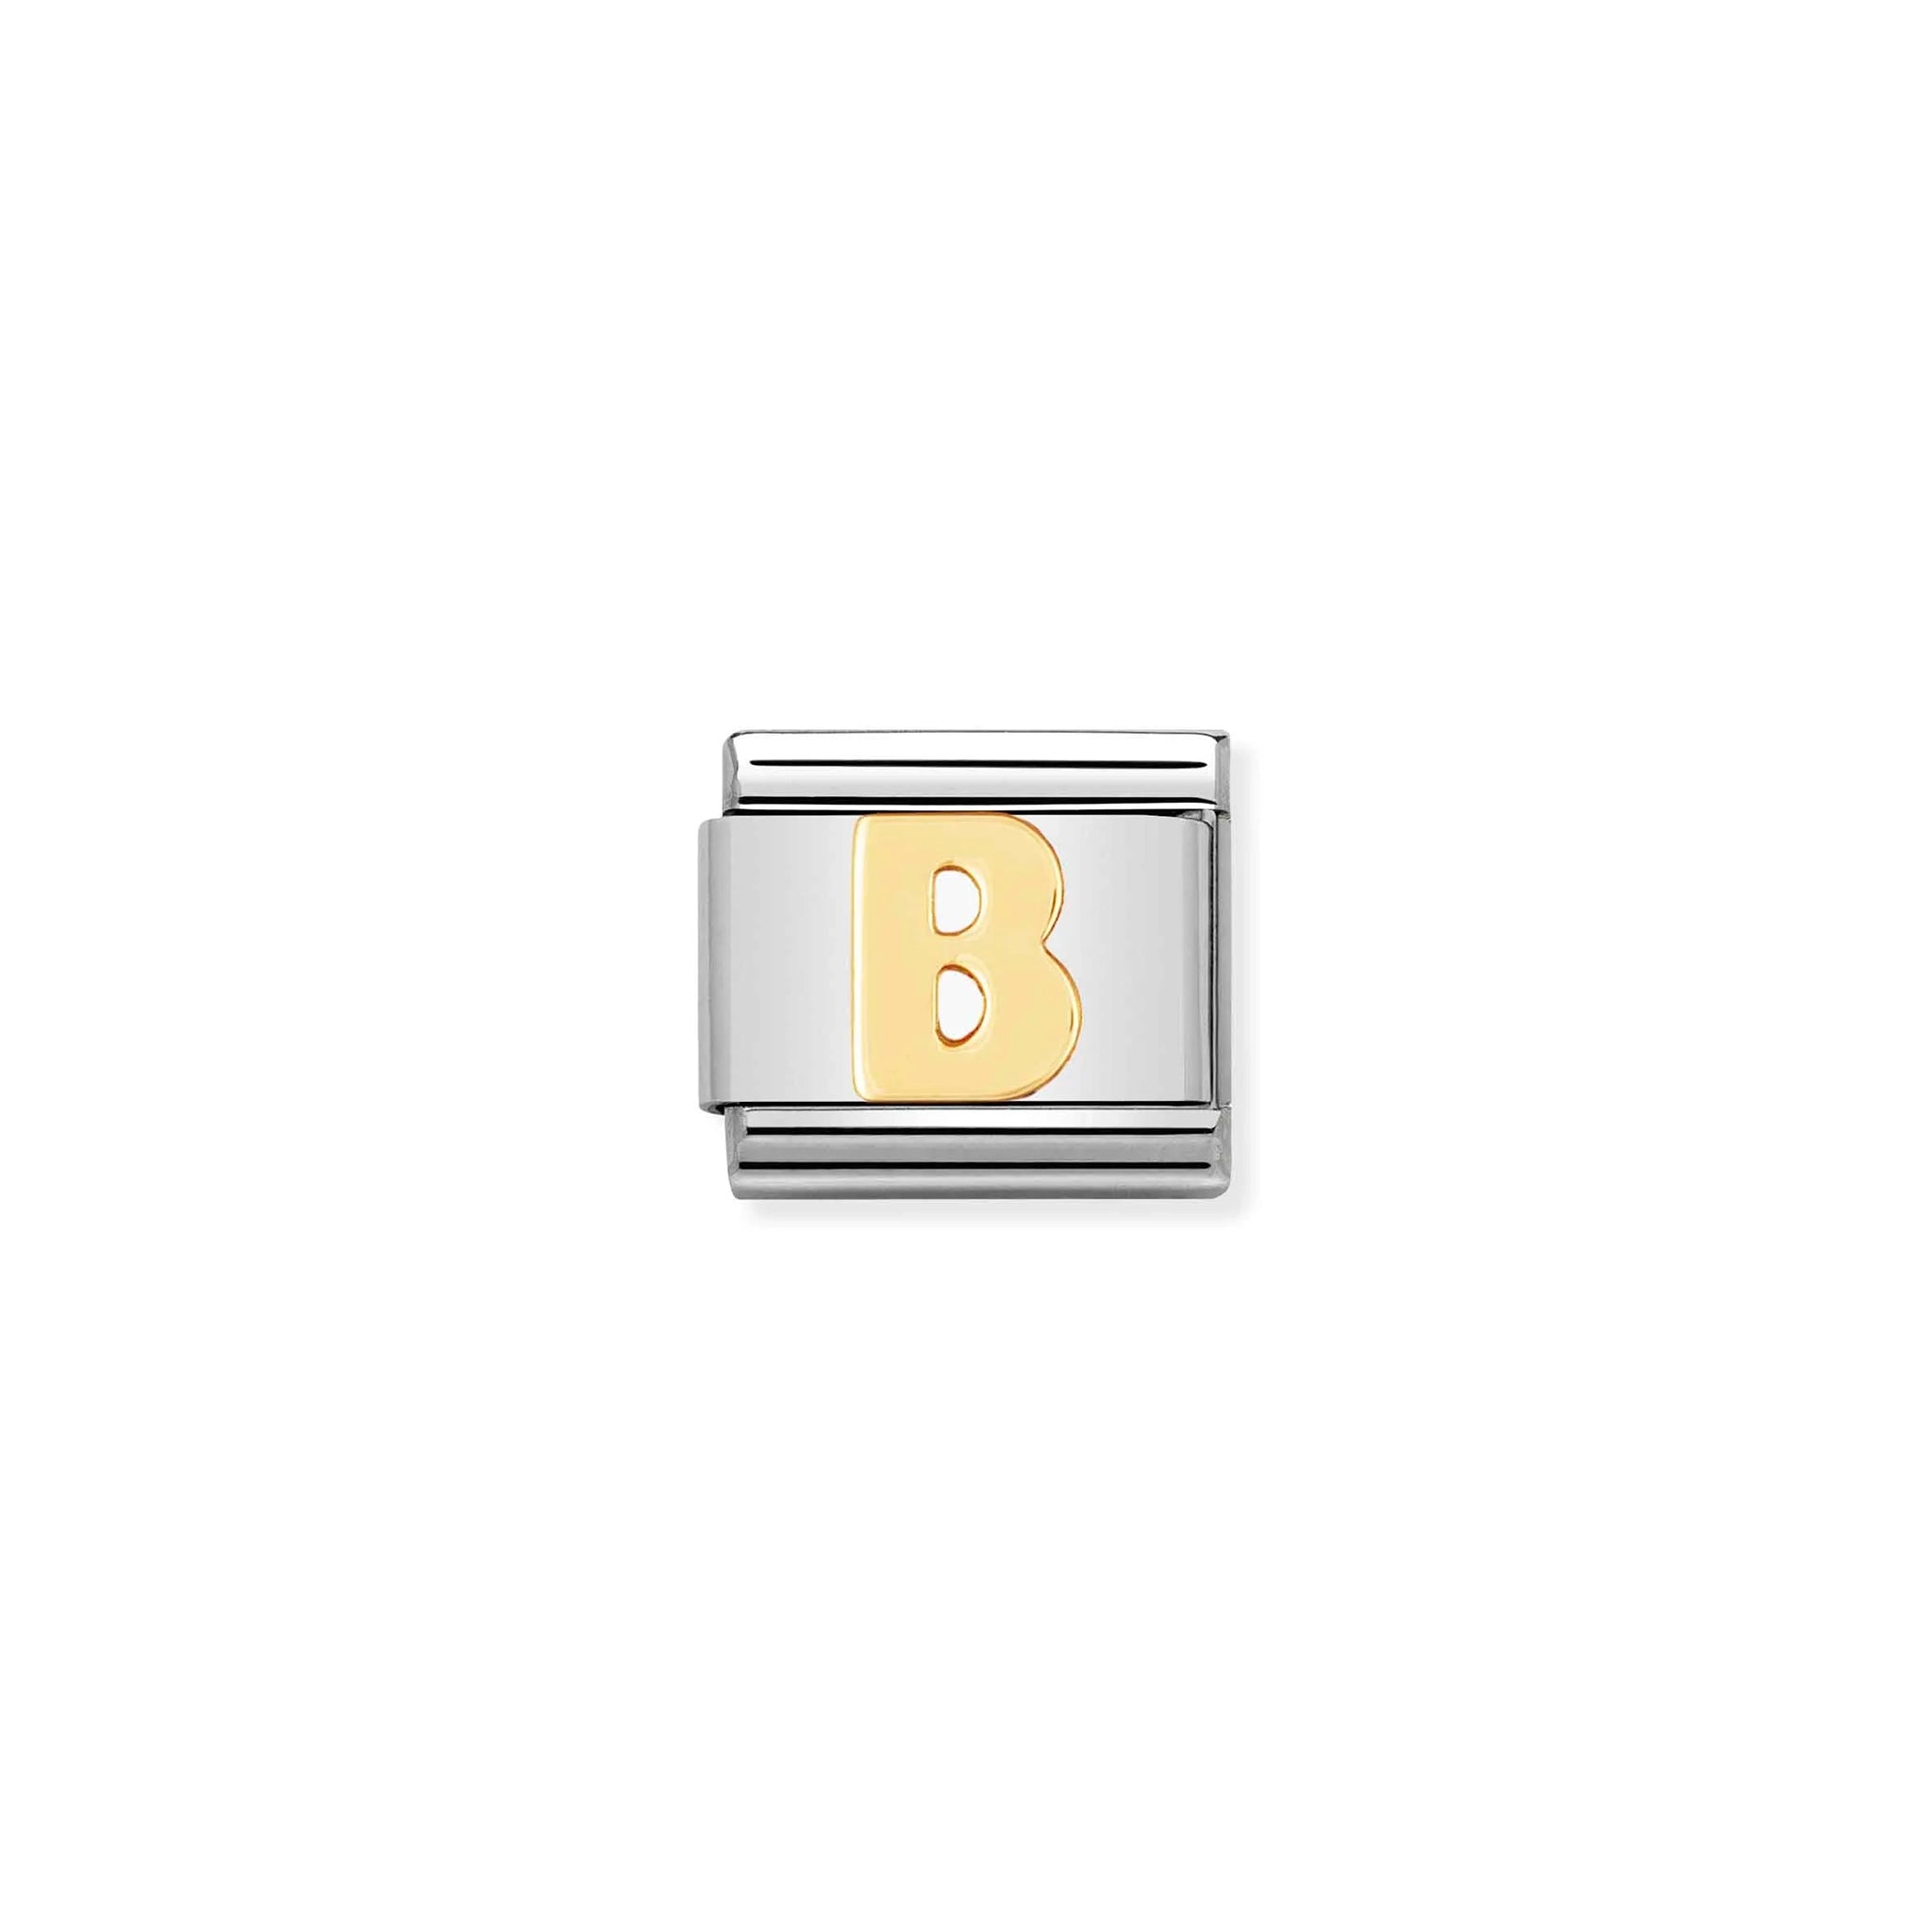 A Nomination charm link in plain gold featuring a letter B